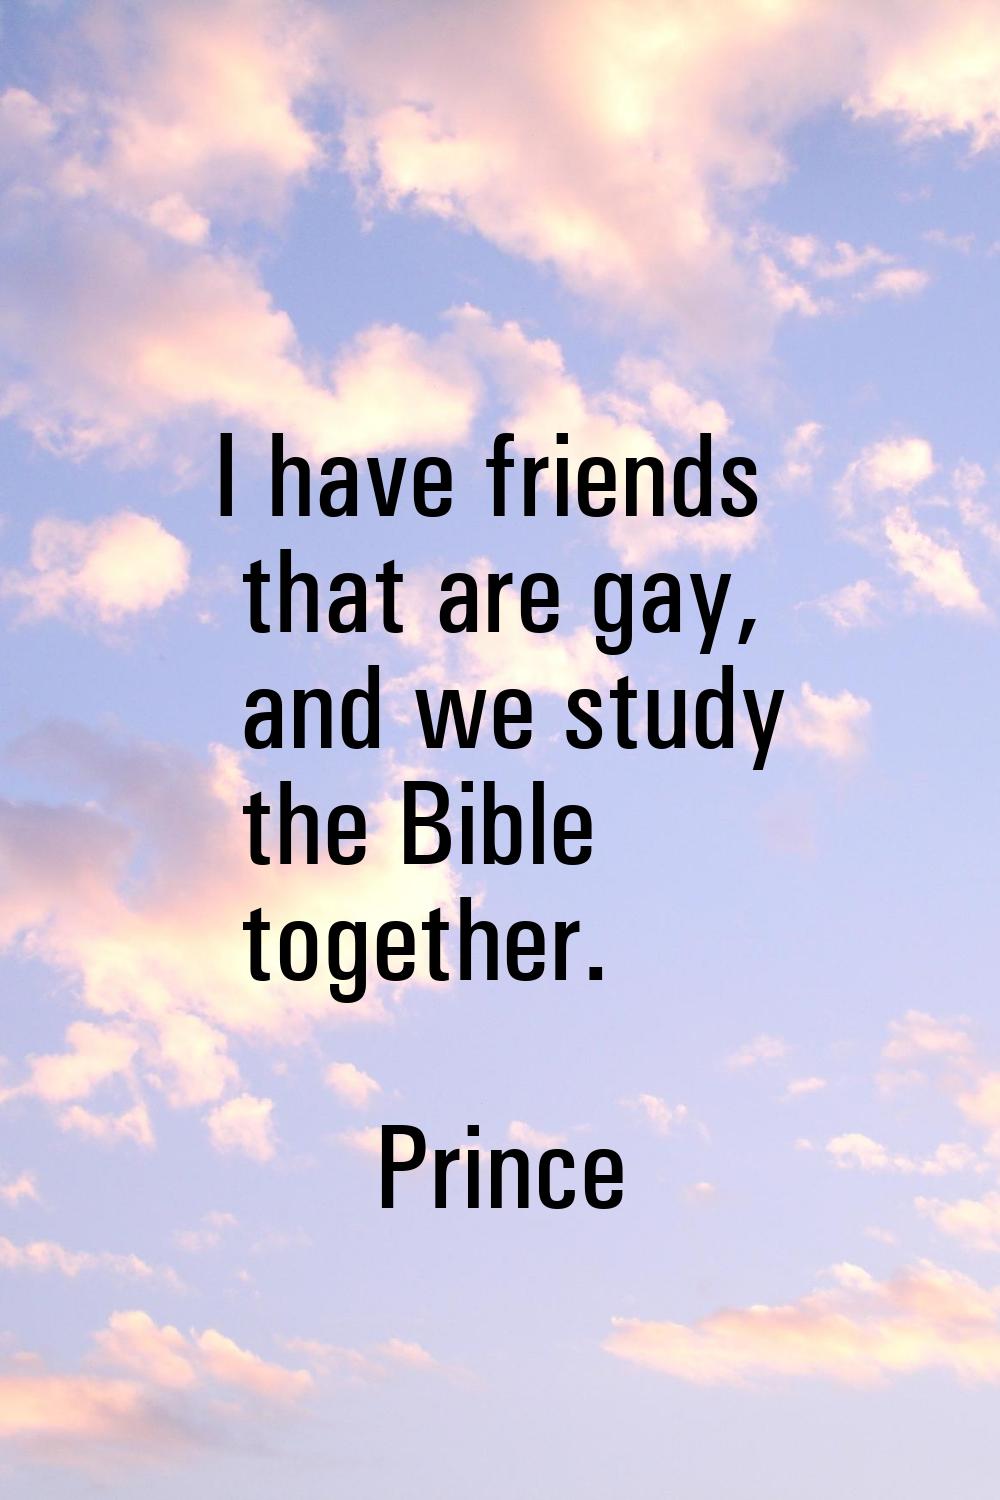 I have friends that are gay, and we study the Bible together.